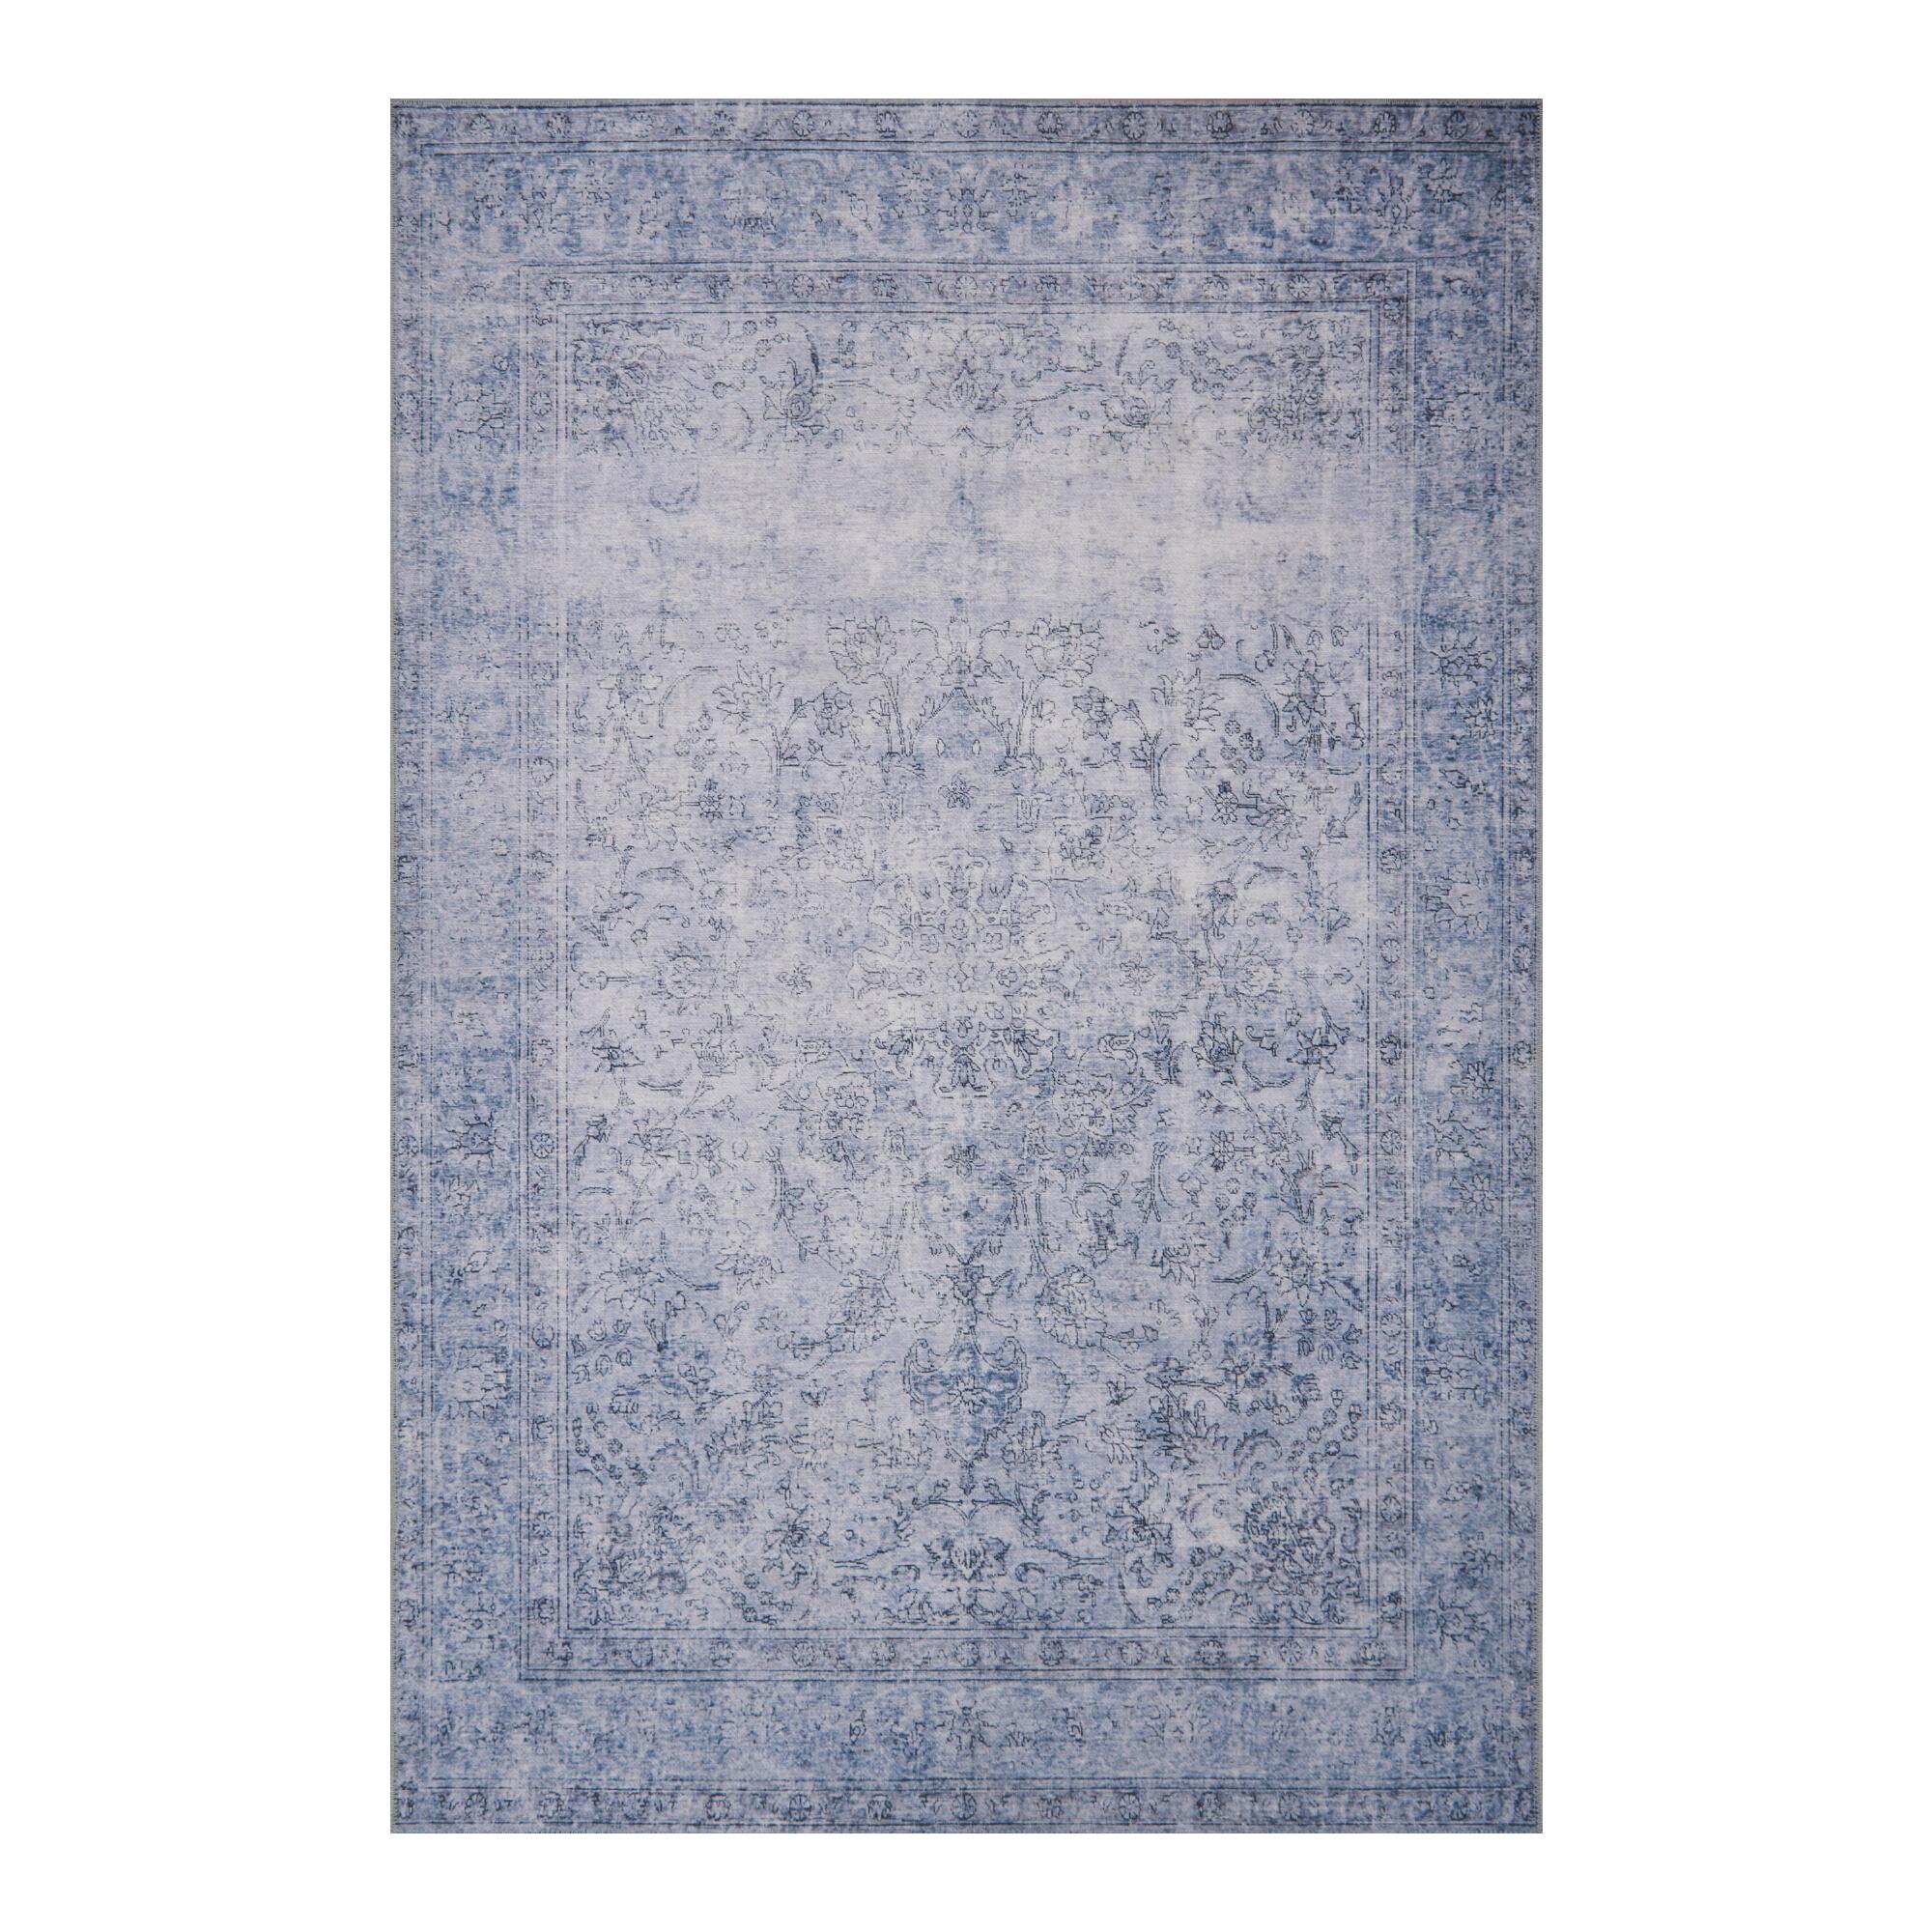 Slate Blue Distressed Presley Area Rug: Gray - Polyester - 8' x 10' by World Market